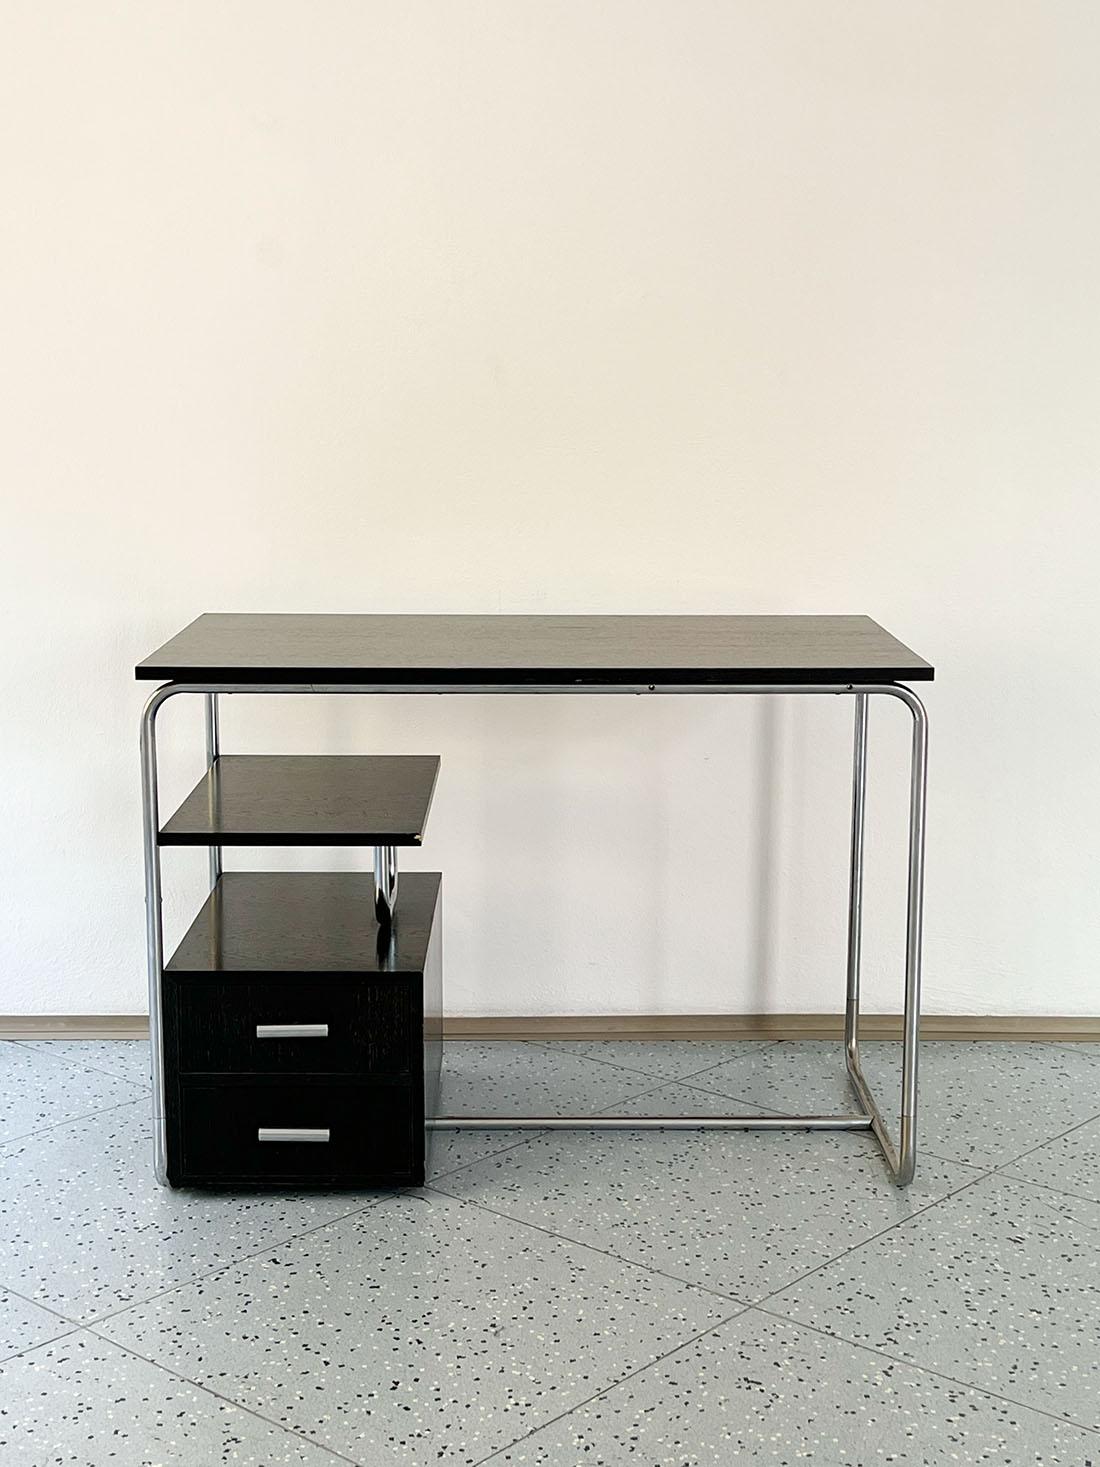 Plated Bauhaus Tubular Steel and Wood Desk, Germany, 1930s For Sale